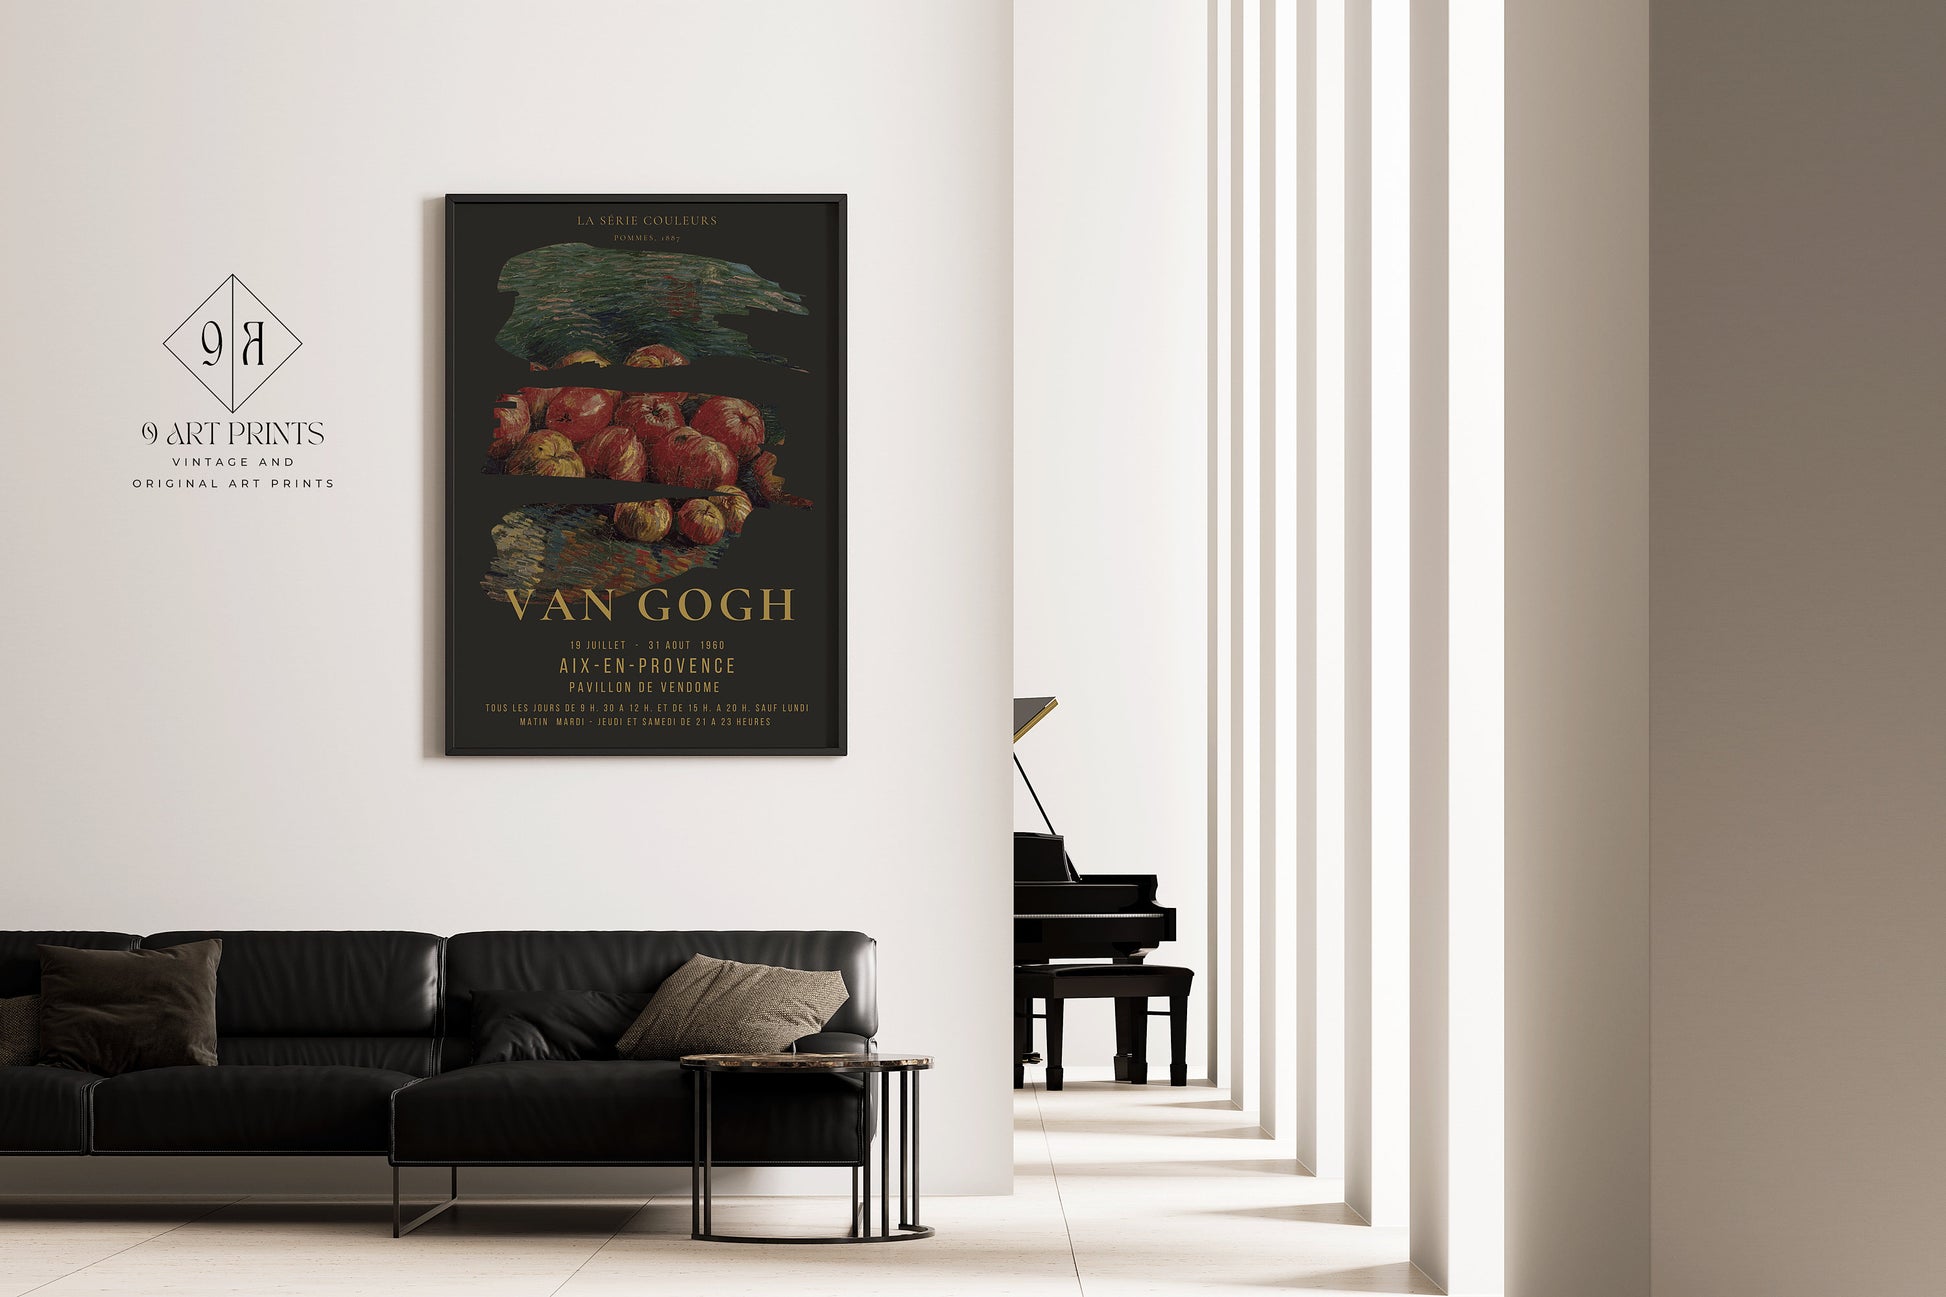 Van Gogh Colour Series Apples Exhibition Museum Poster Fine Art Painting Vintage Famous Ready to hang Framed Home Office Decor Gift Idea